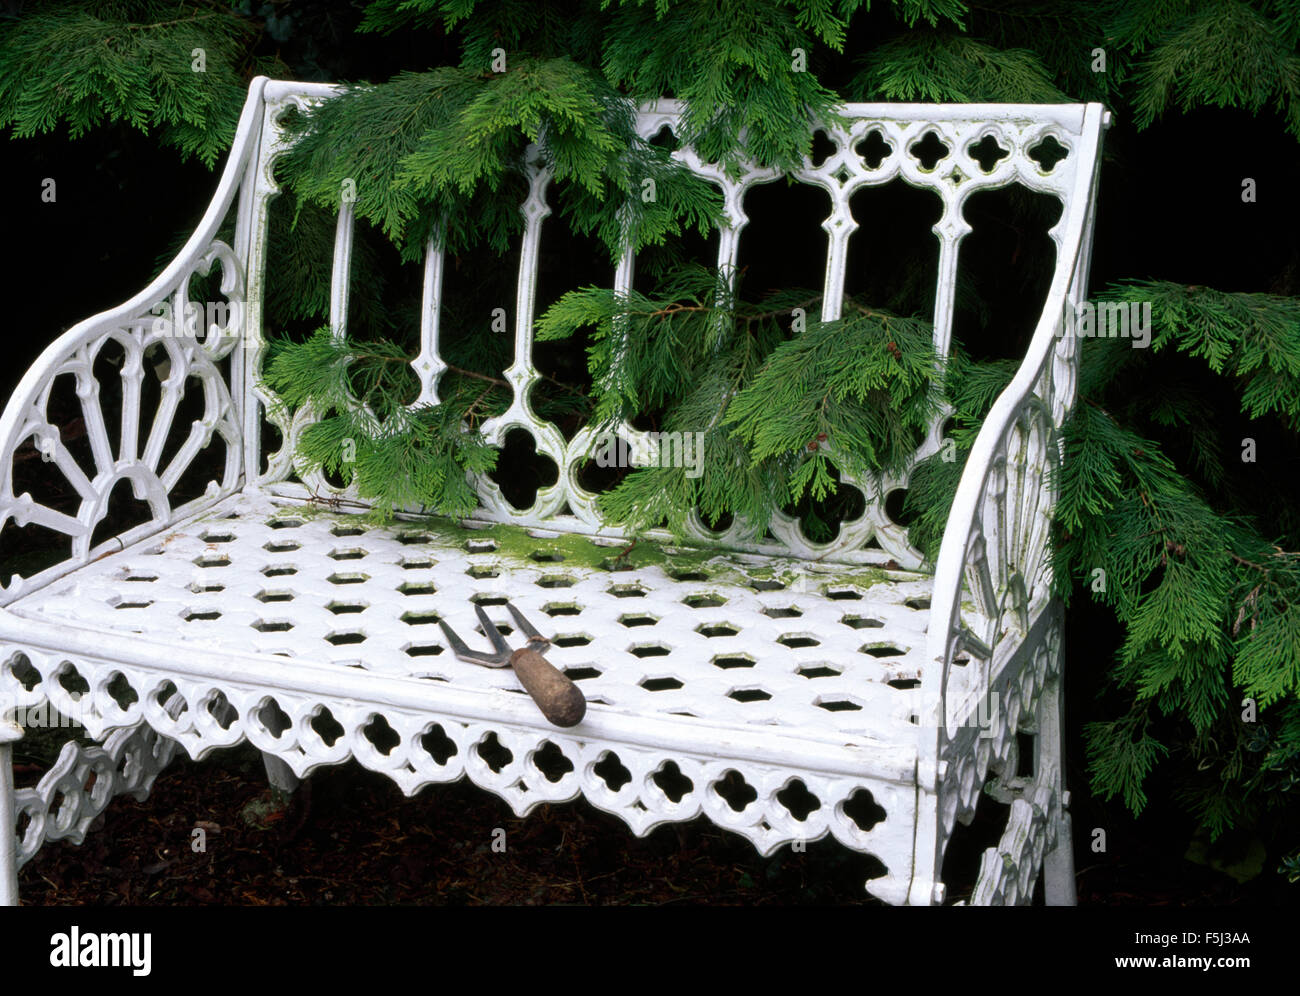 Small garden fork on a white wrought iron garden bench in front of a green conifer shrub Stock Photo